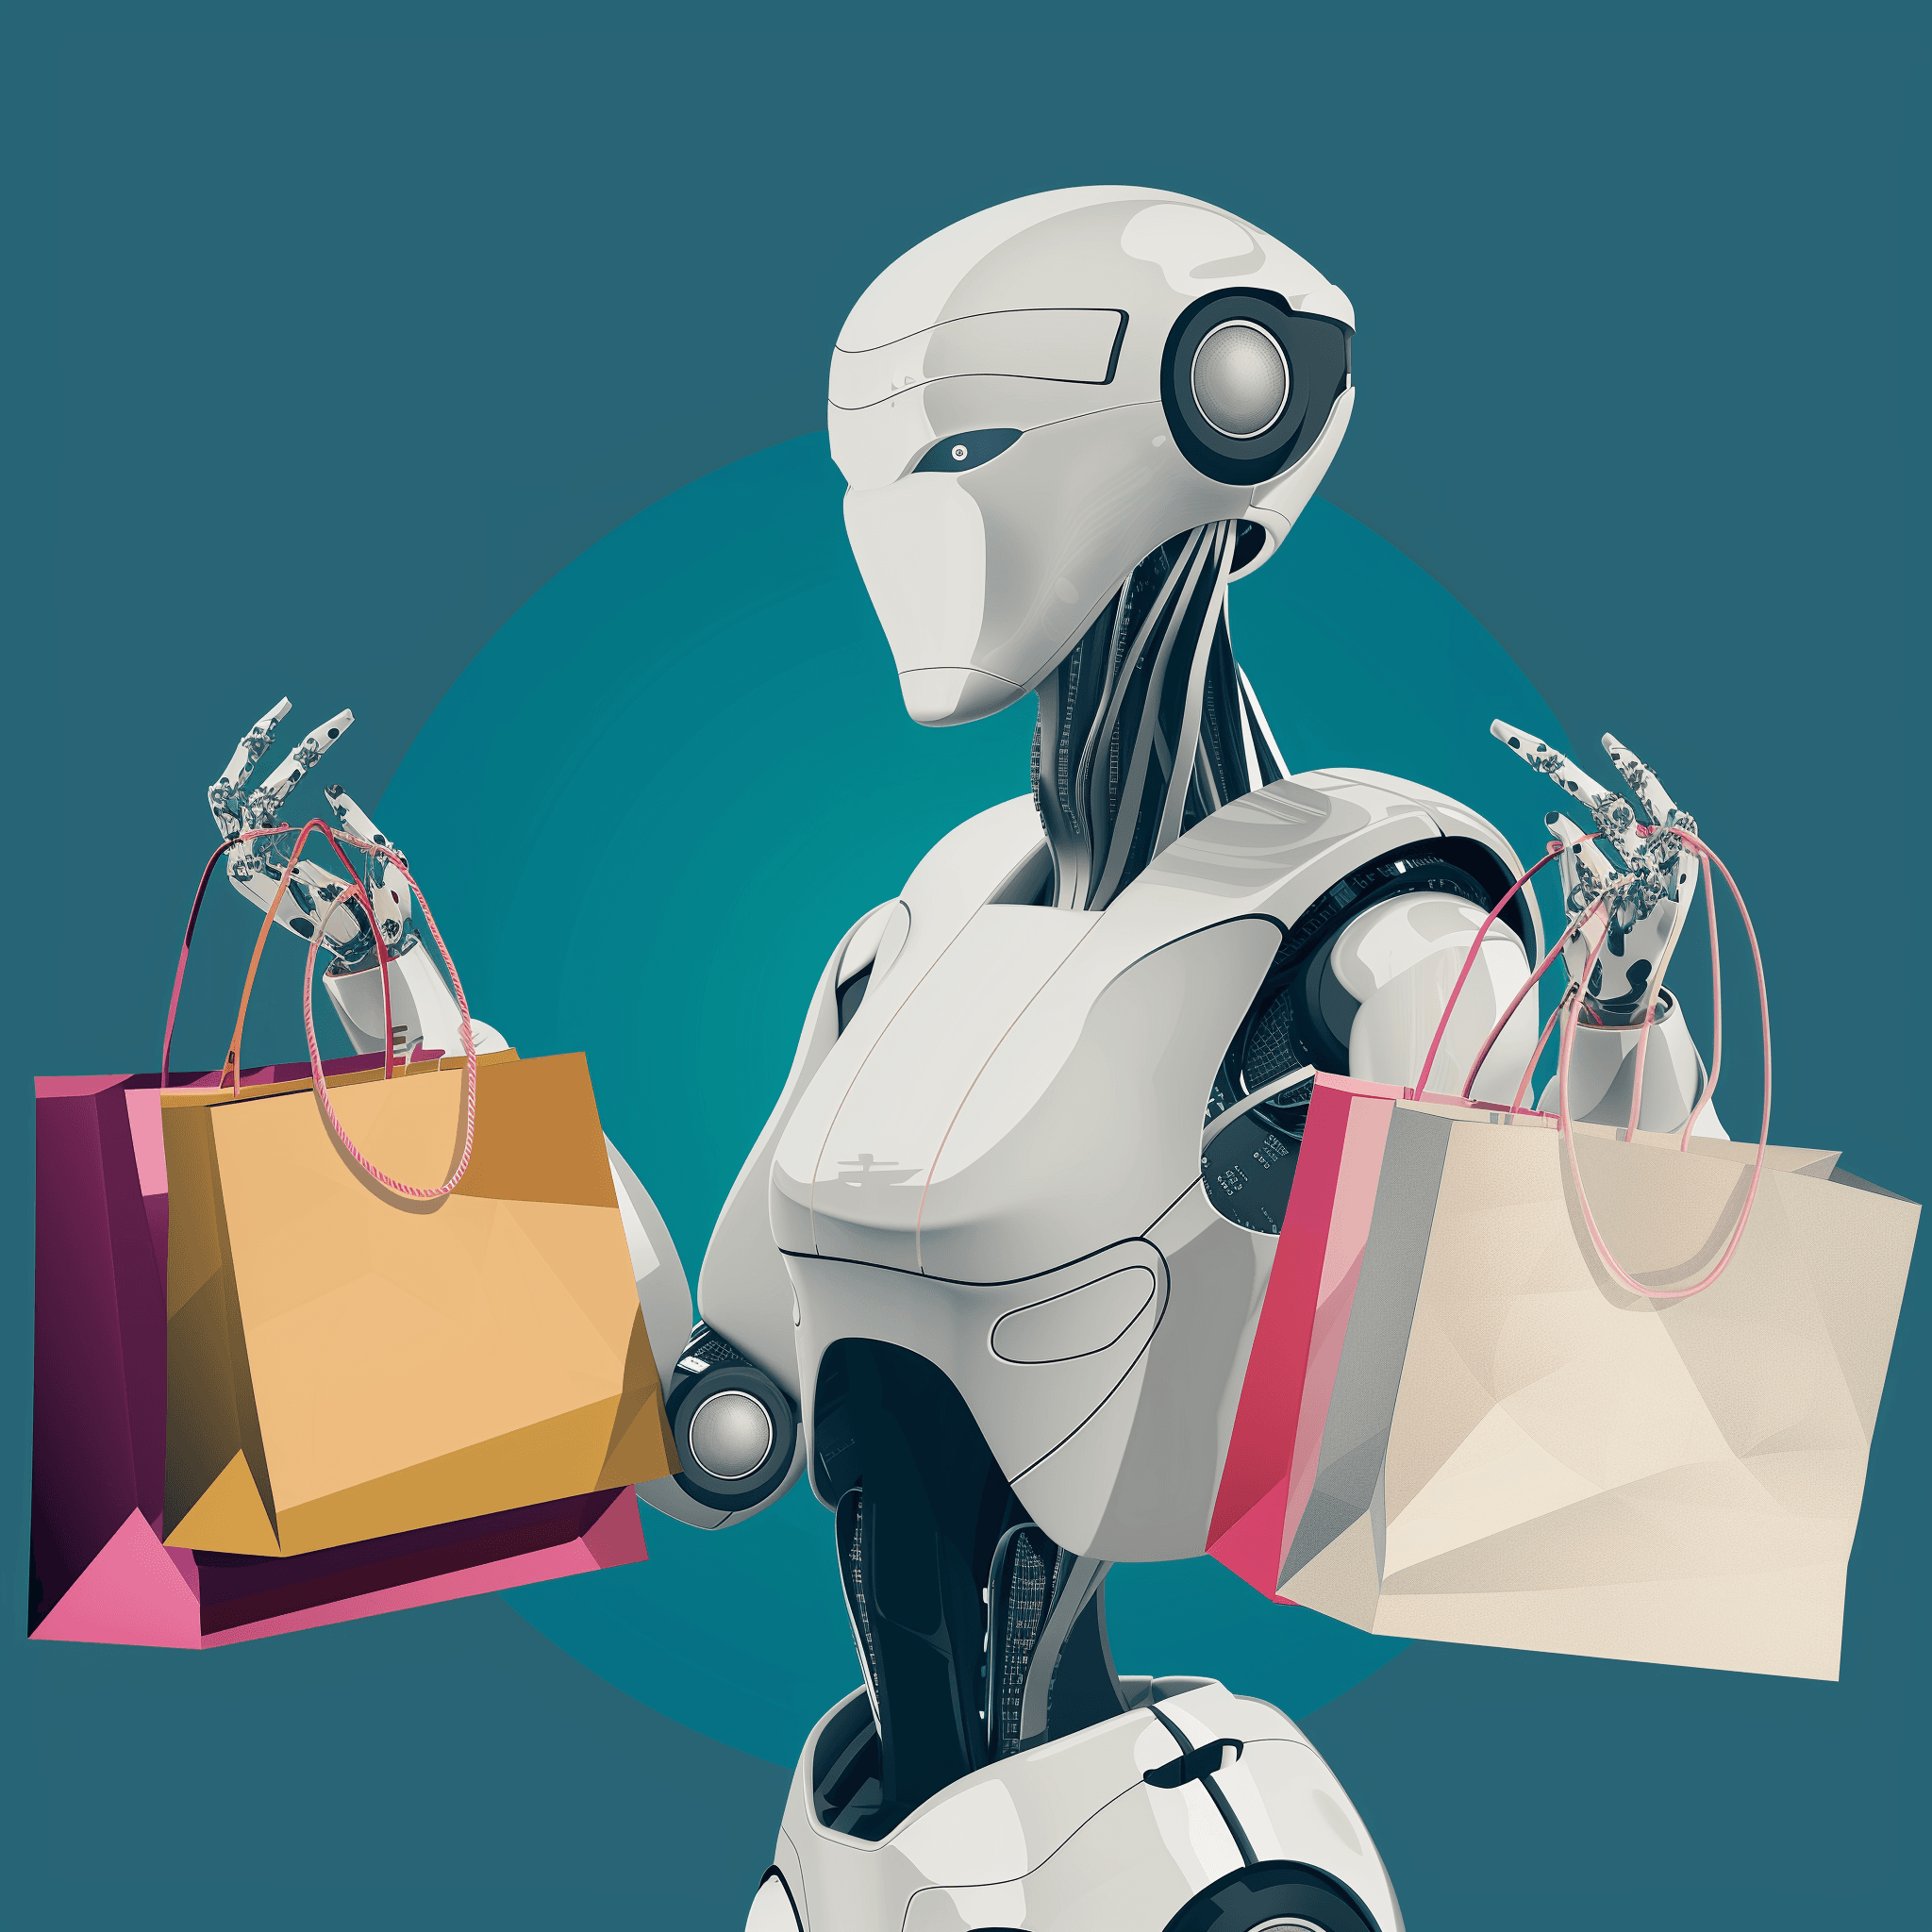 Image of AI robot helping during shopping